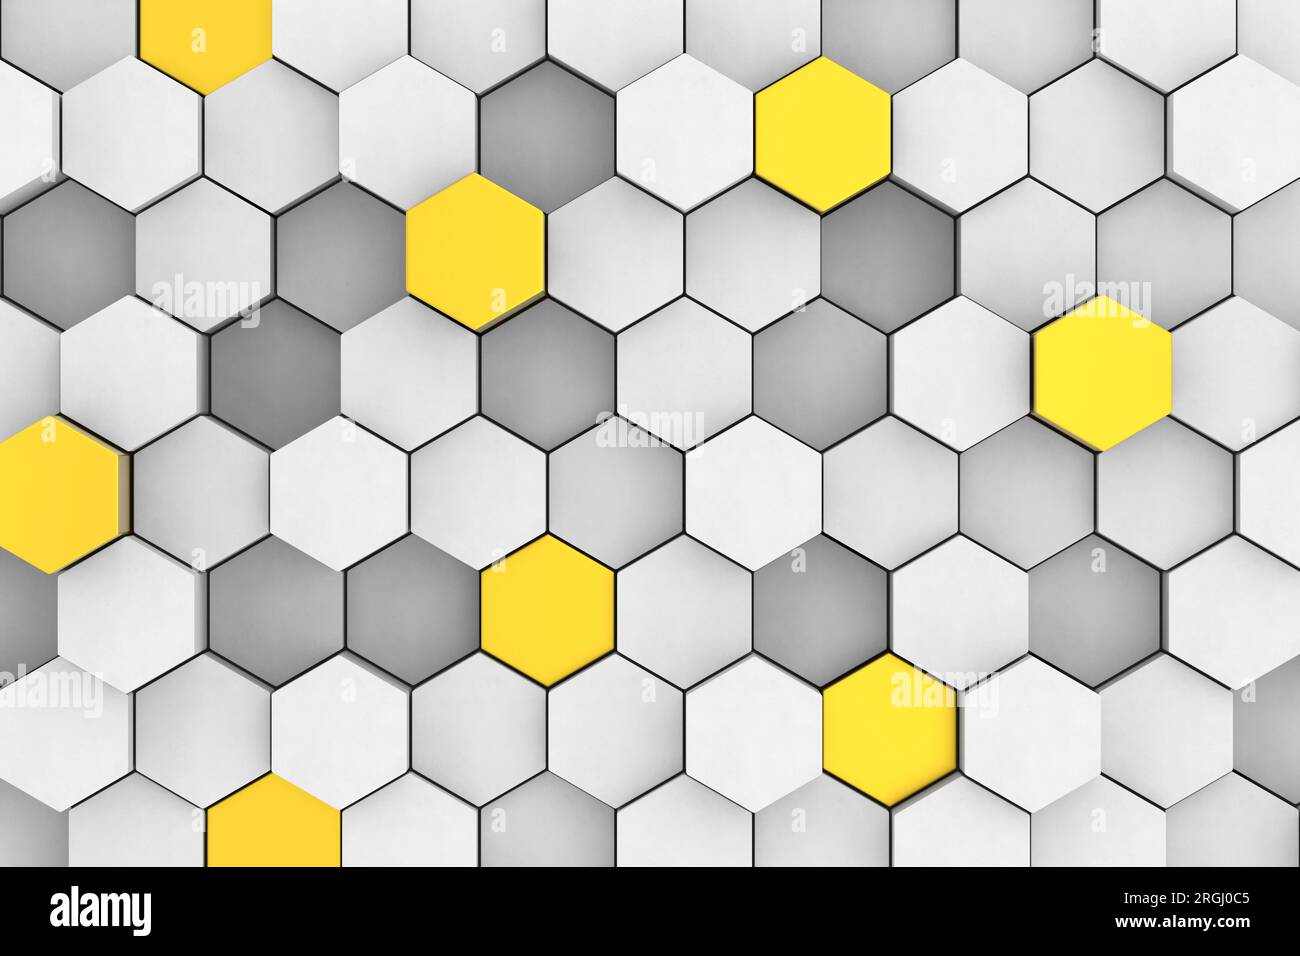 hexagonal cellular structure. Wall texture with 3D hexagon tile pattern. 3D illustration Stock Photo